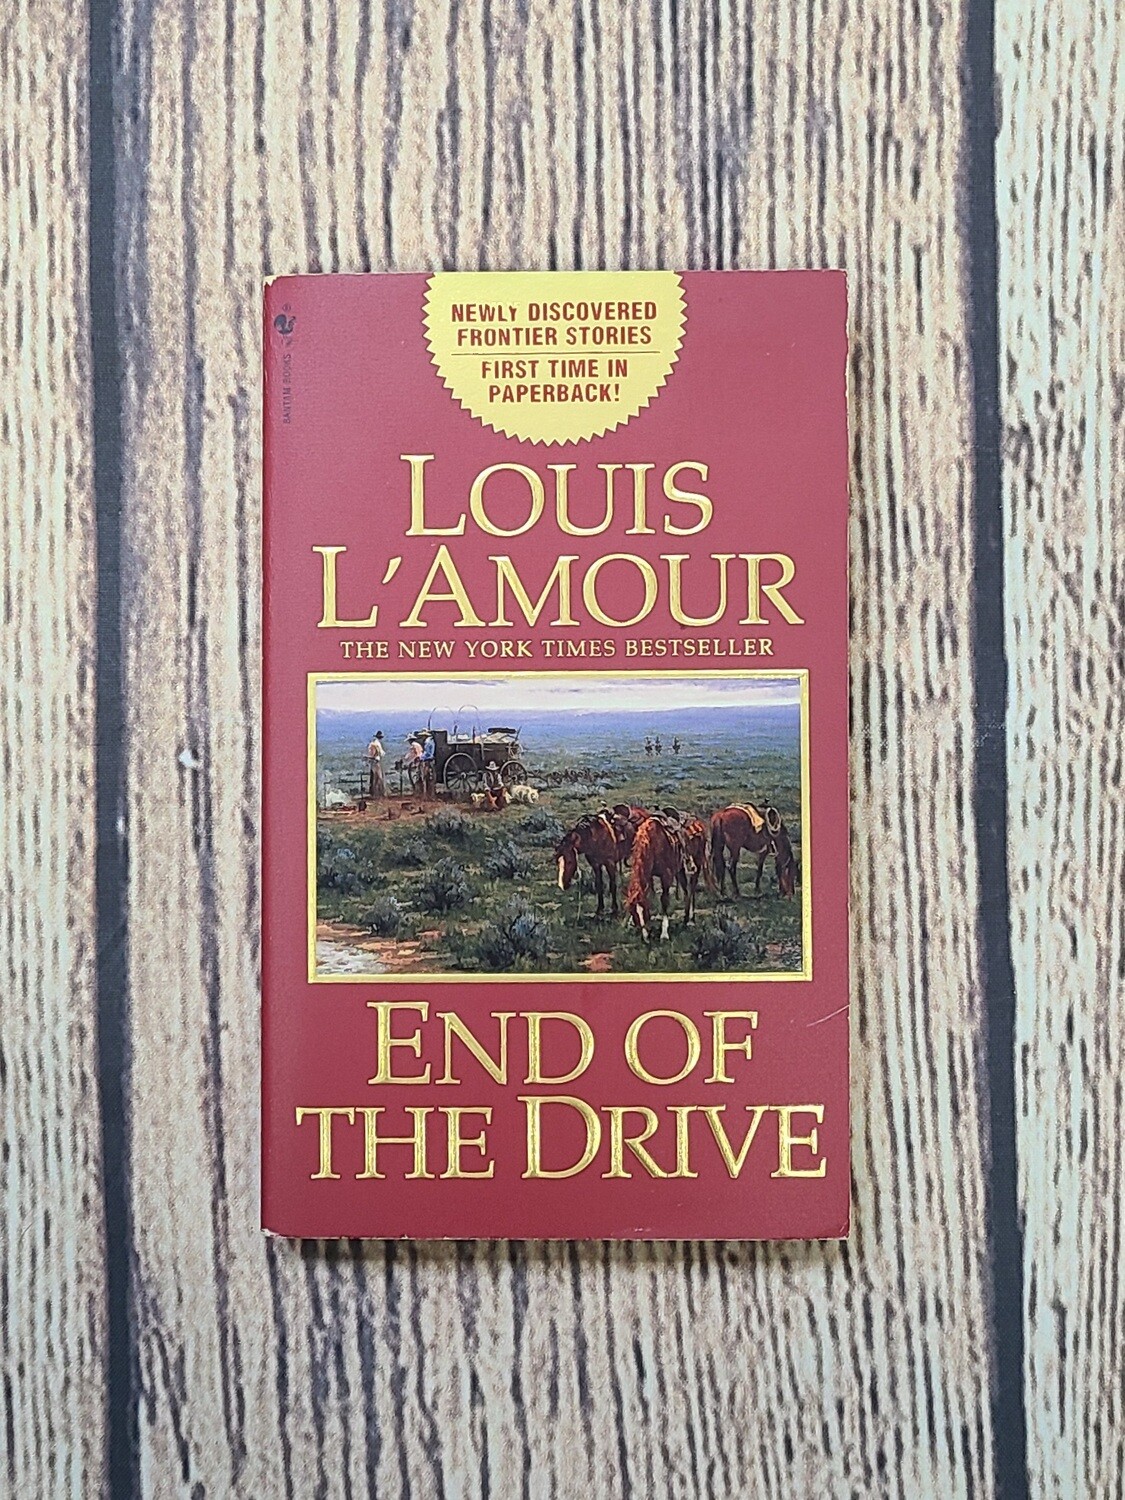 End Of The Drive by Louis L'Amour